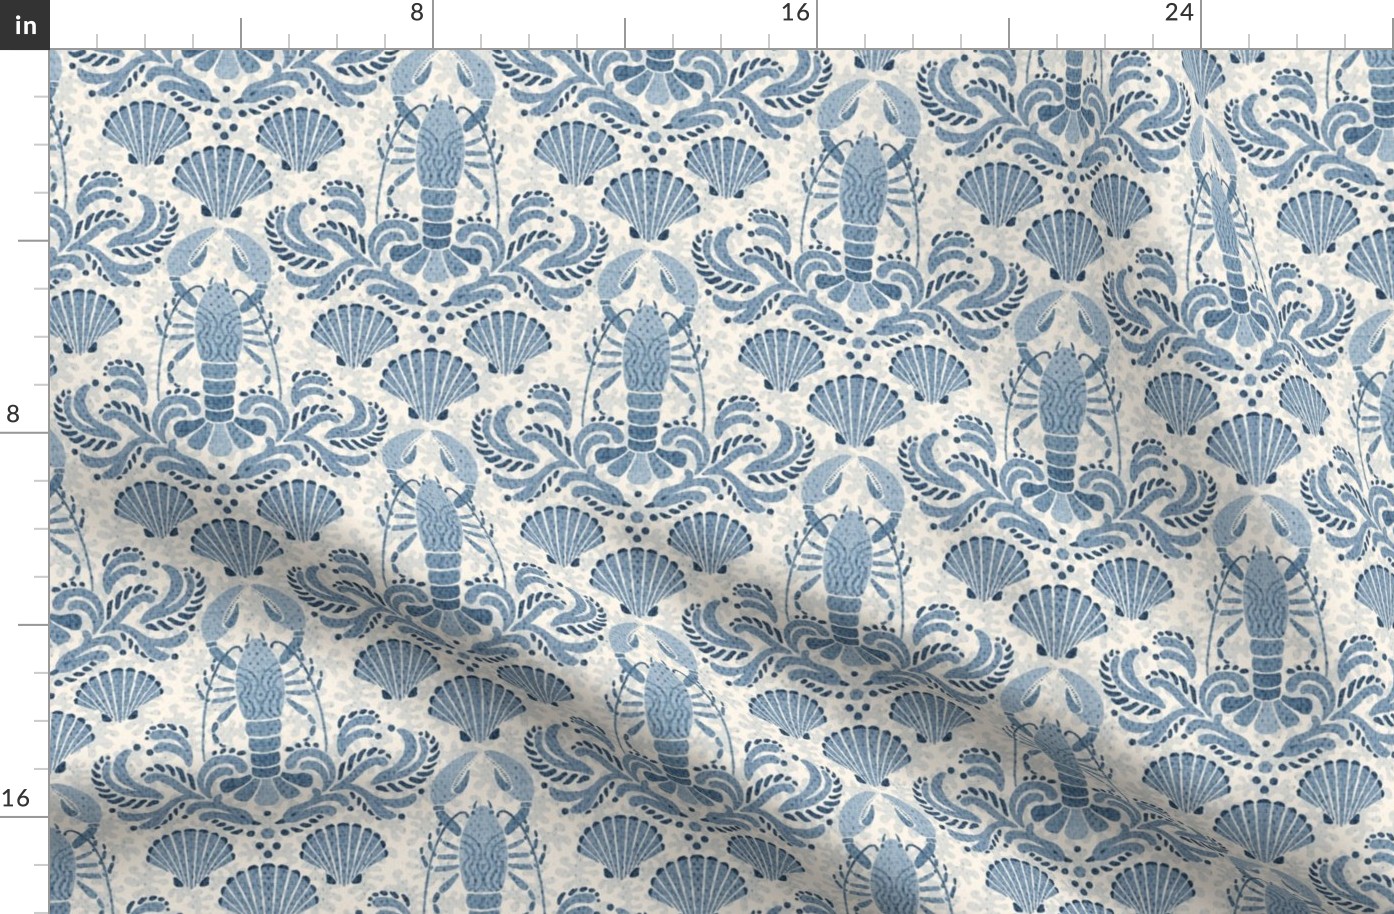 Lobster damask in faded indigo blue -  small scale